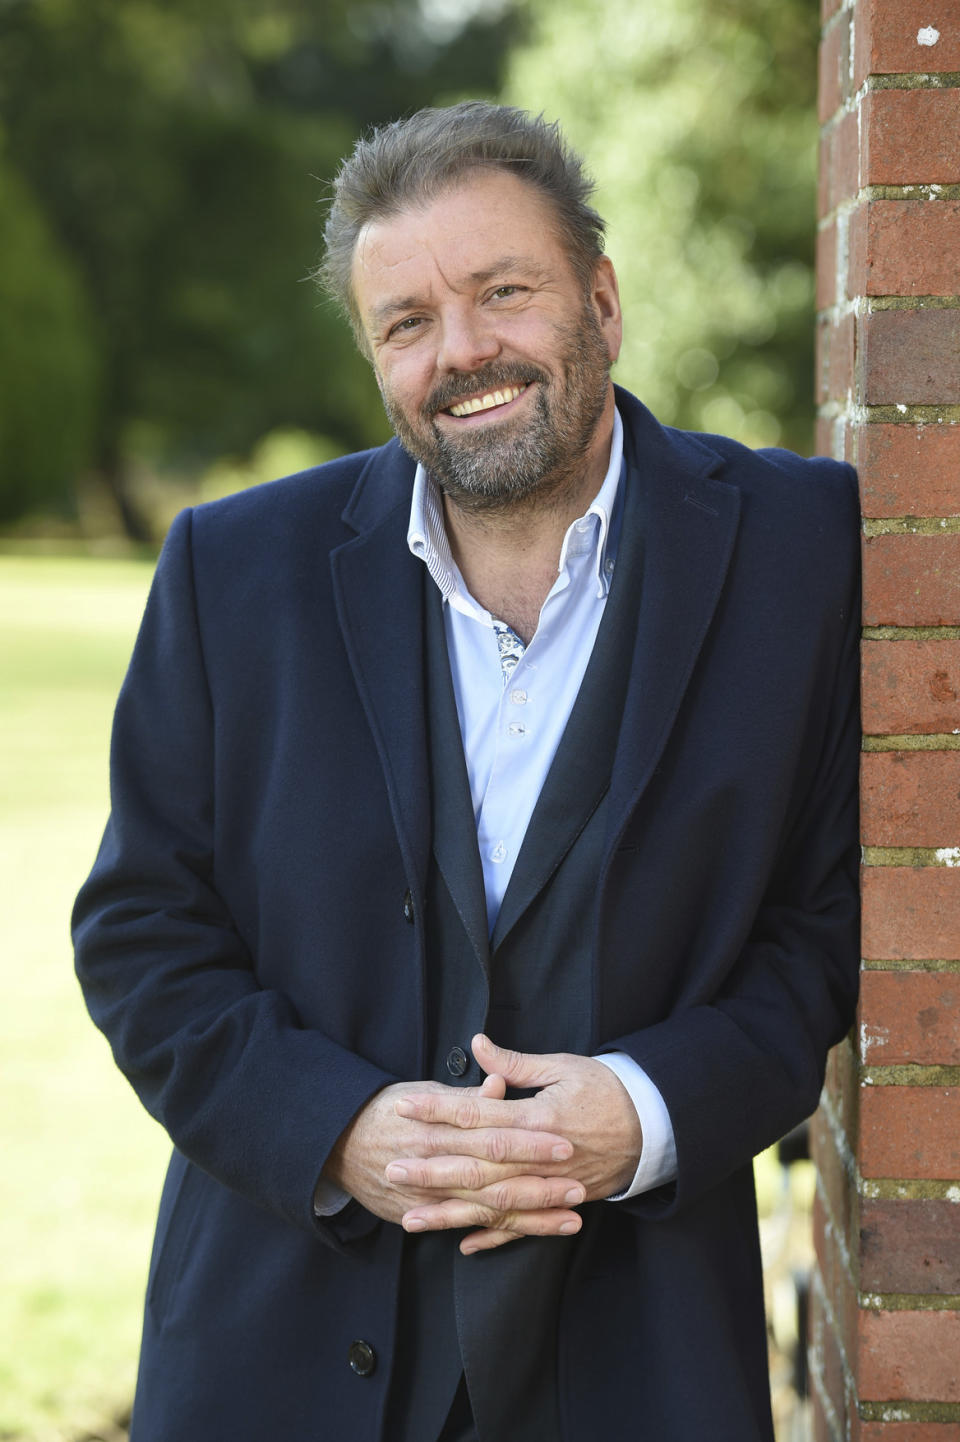 Martin Roberts is the presenter of property show Homes Under the Hammer. (Lion TV/BBC)